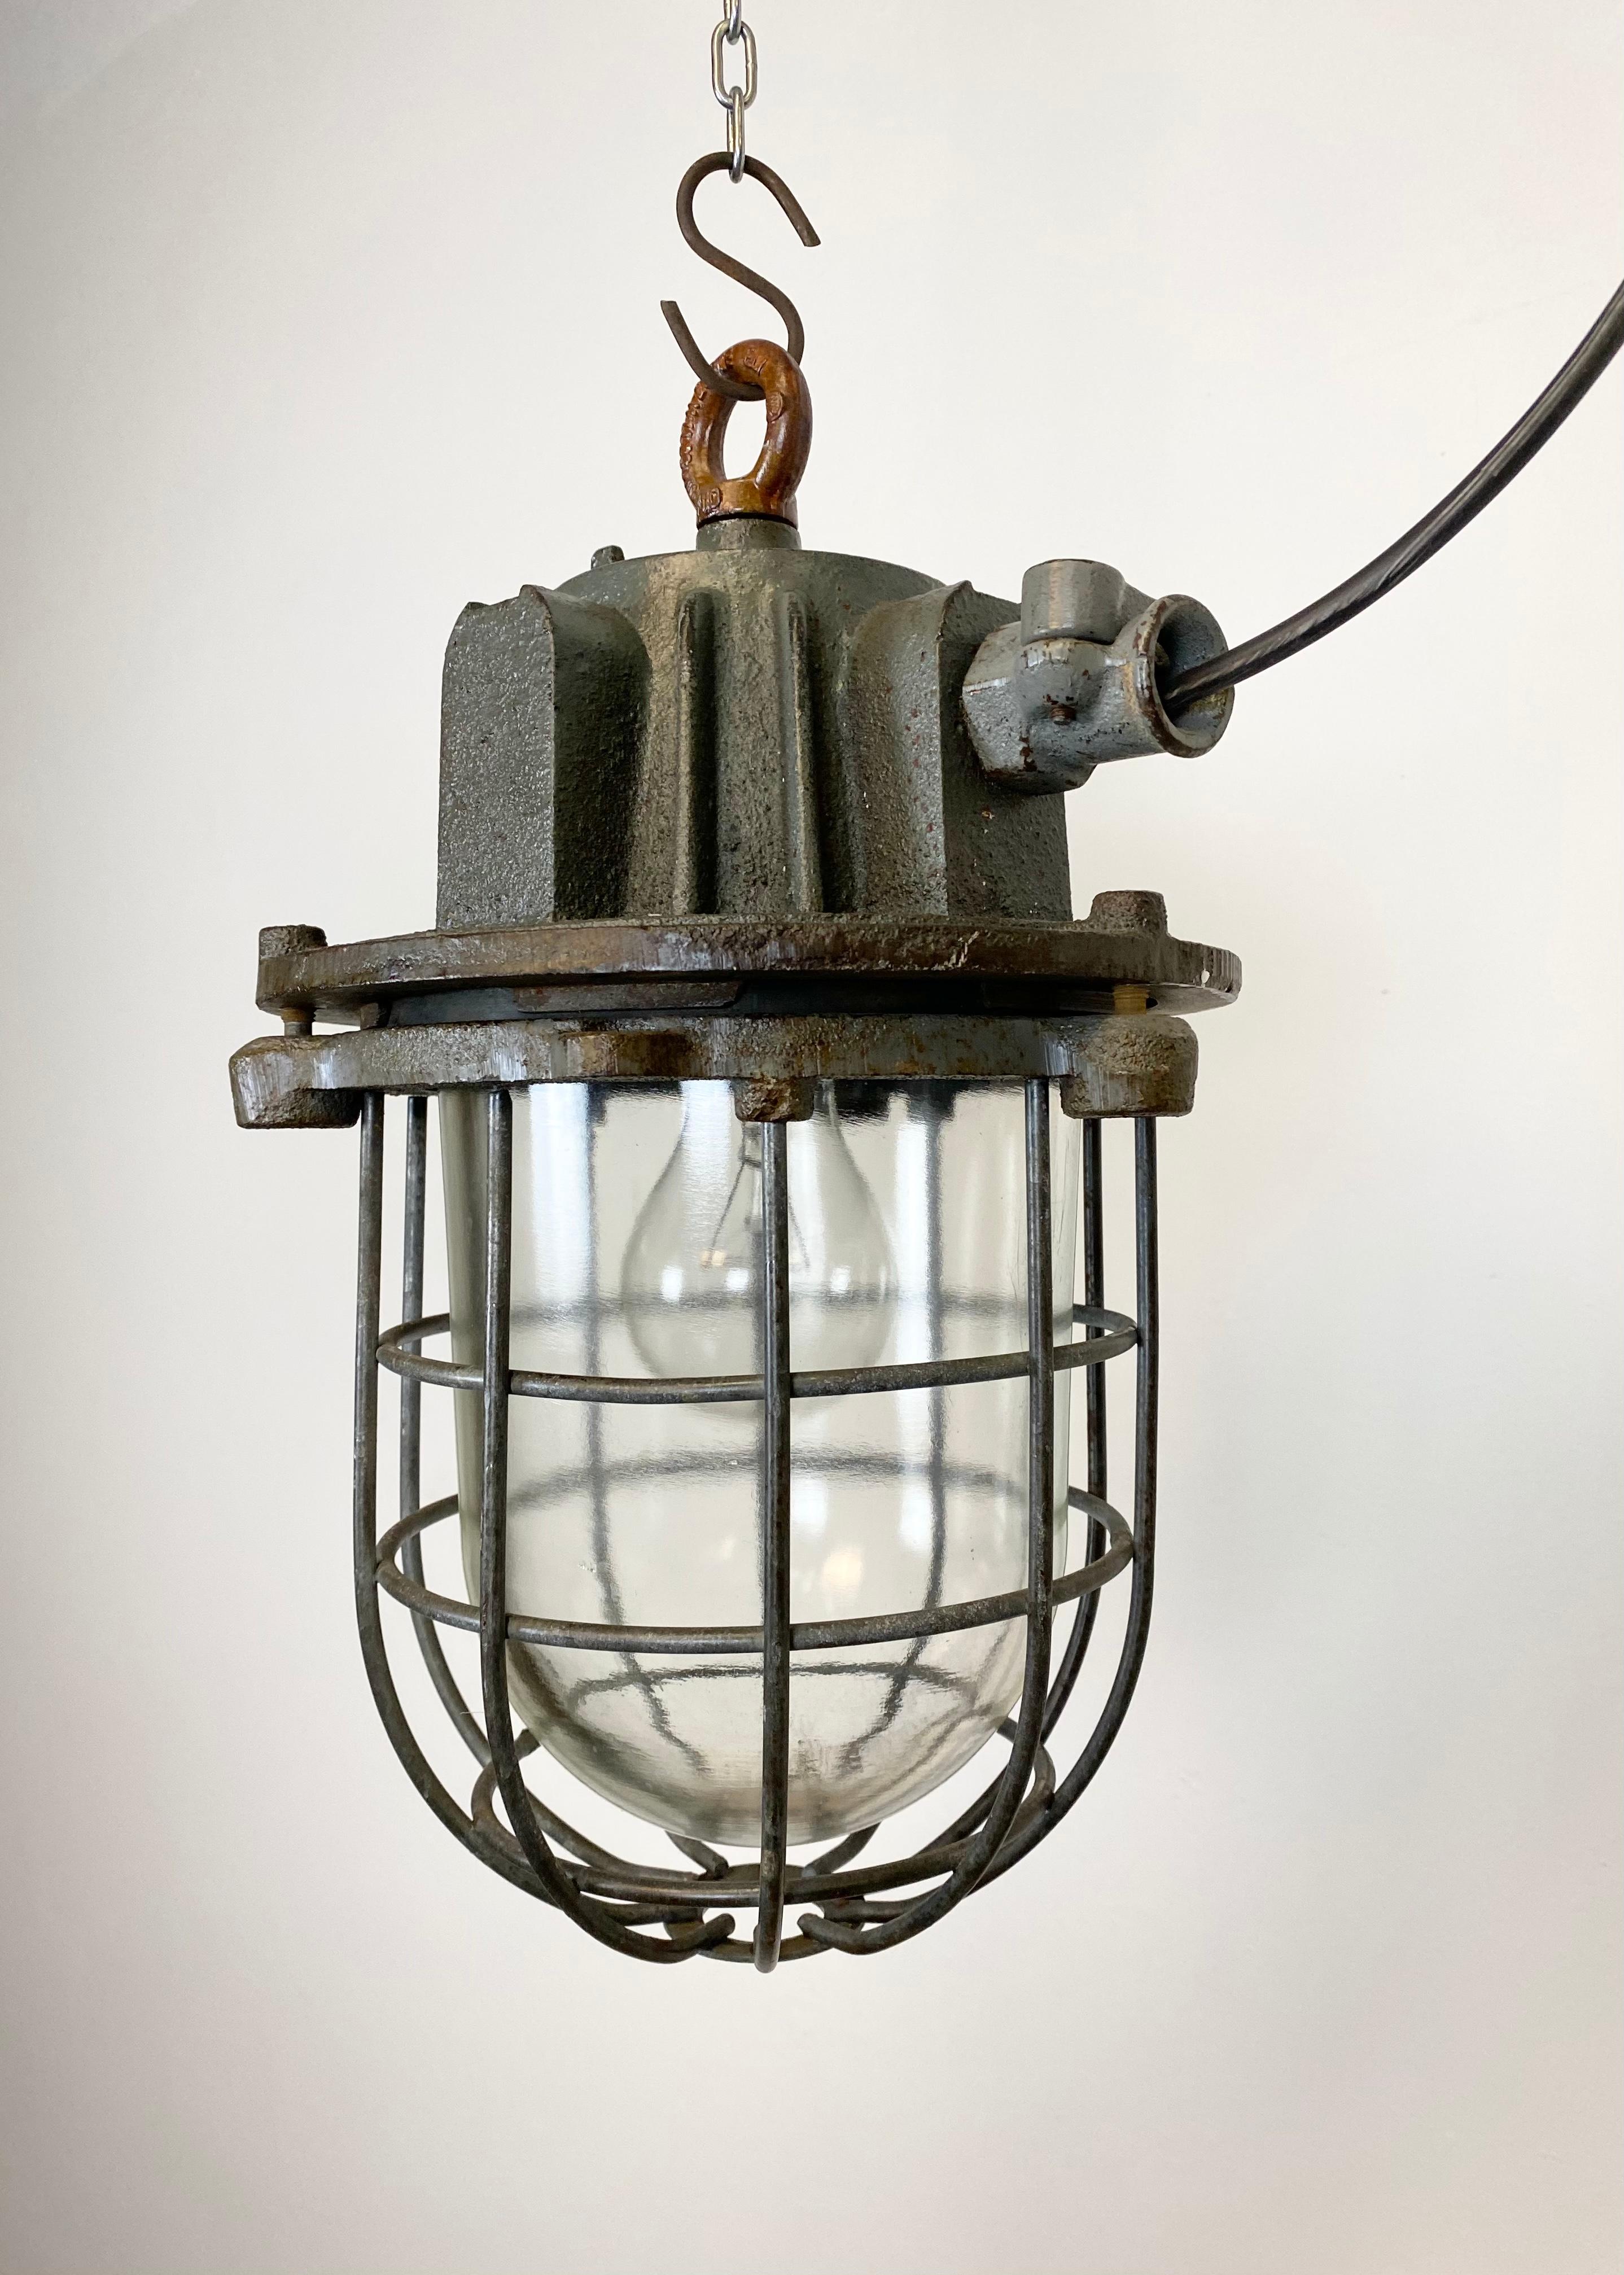 Industrial hanging lamp made in former Czechoslovakia during the 1960s. It features cast iron top, clear glass cover and iron grid. Porcelain socket for E 27 lightbulbs and new wire. The weight of the lamp is 9 kg.